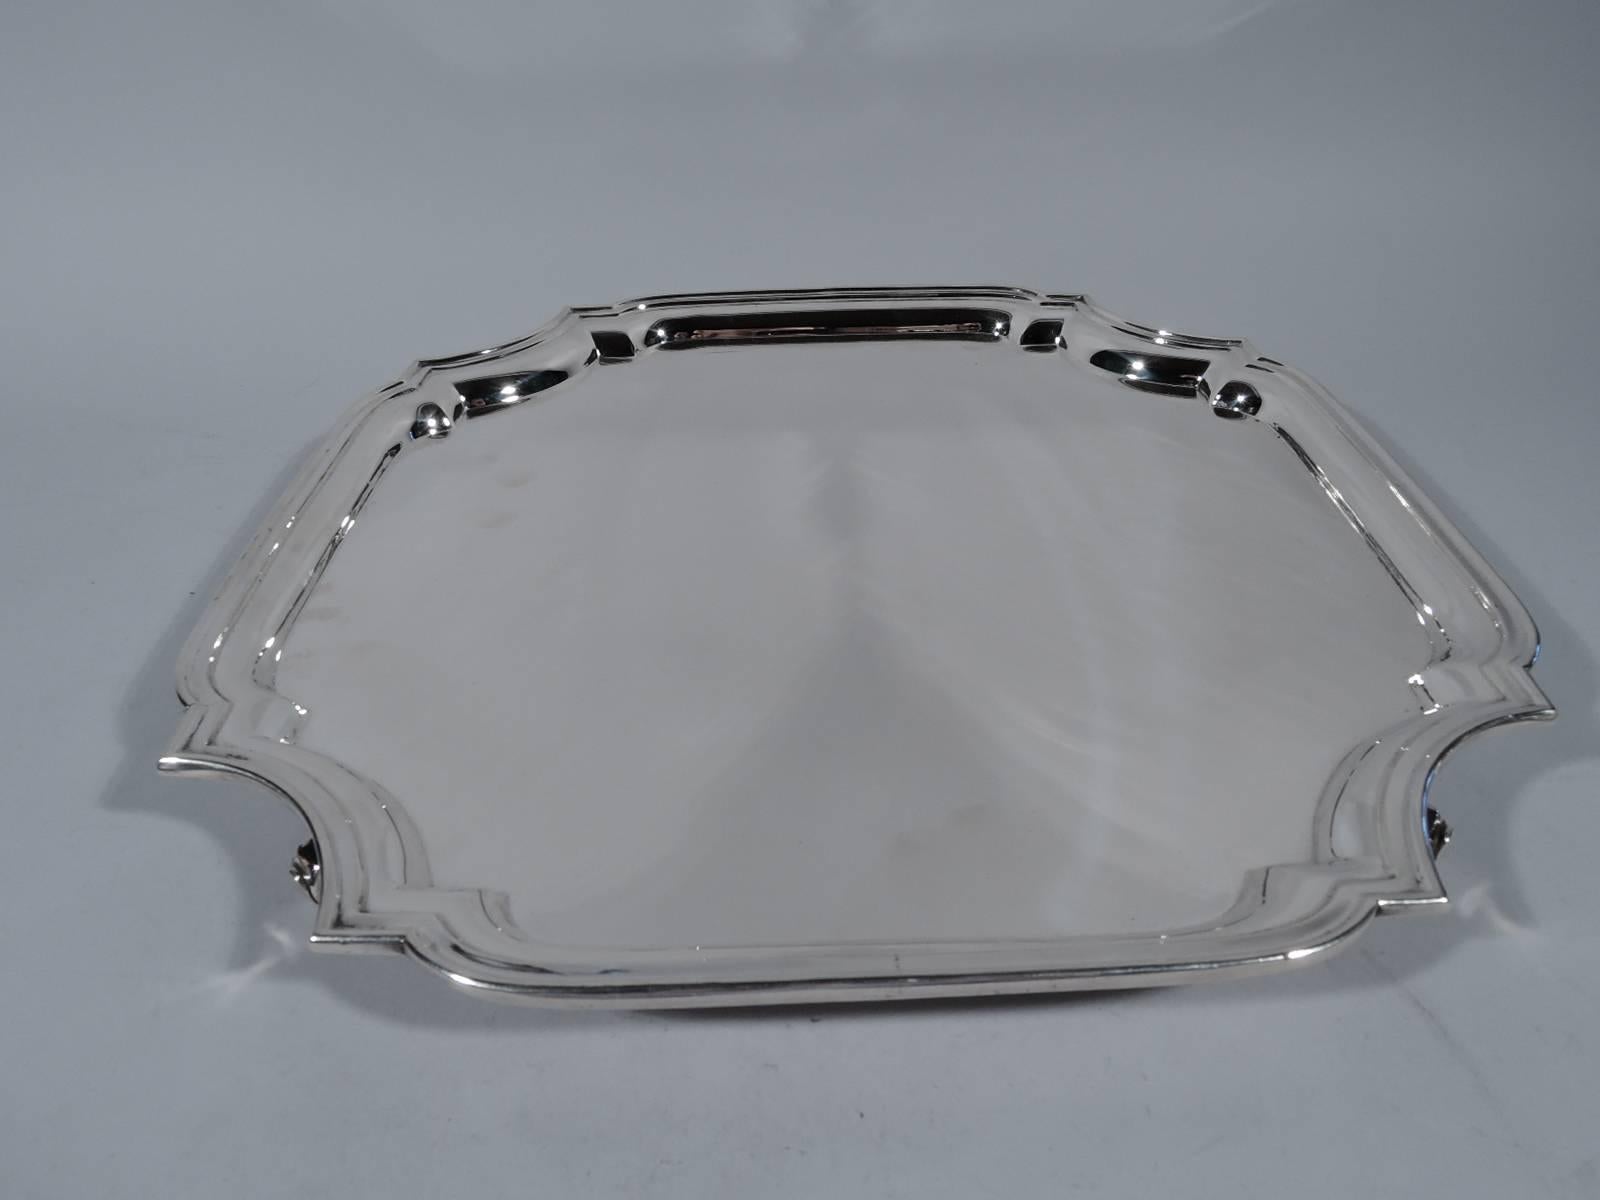 Georgian-style sterling silver salver. Made by Tiffany & Co. in New York. Four sides with concave corners and molded rim. Four volute scroll supports. A fine traditional piece. Hallmark includes postwar pattern no. 25147. Measure: Heavy weight 48